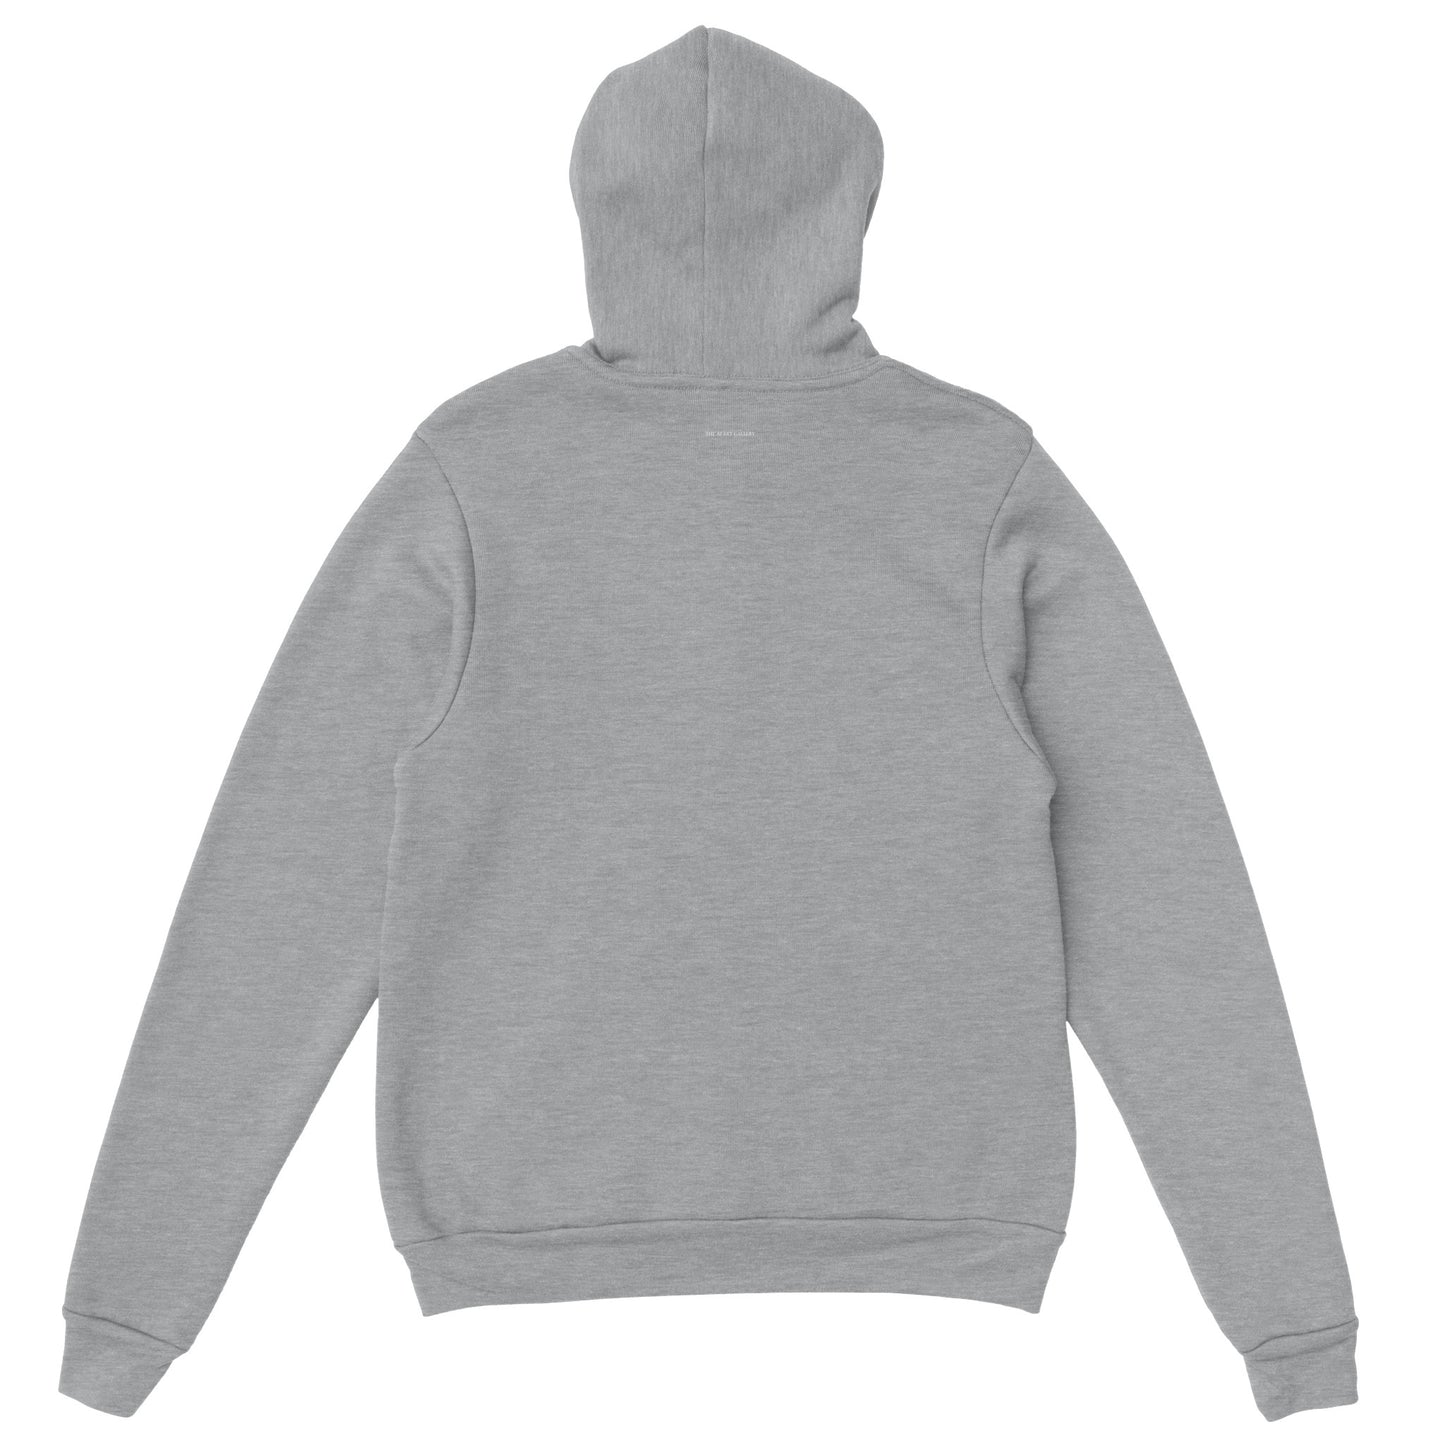 fumigans fratribus / SS23 / Hoodie / sports grey